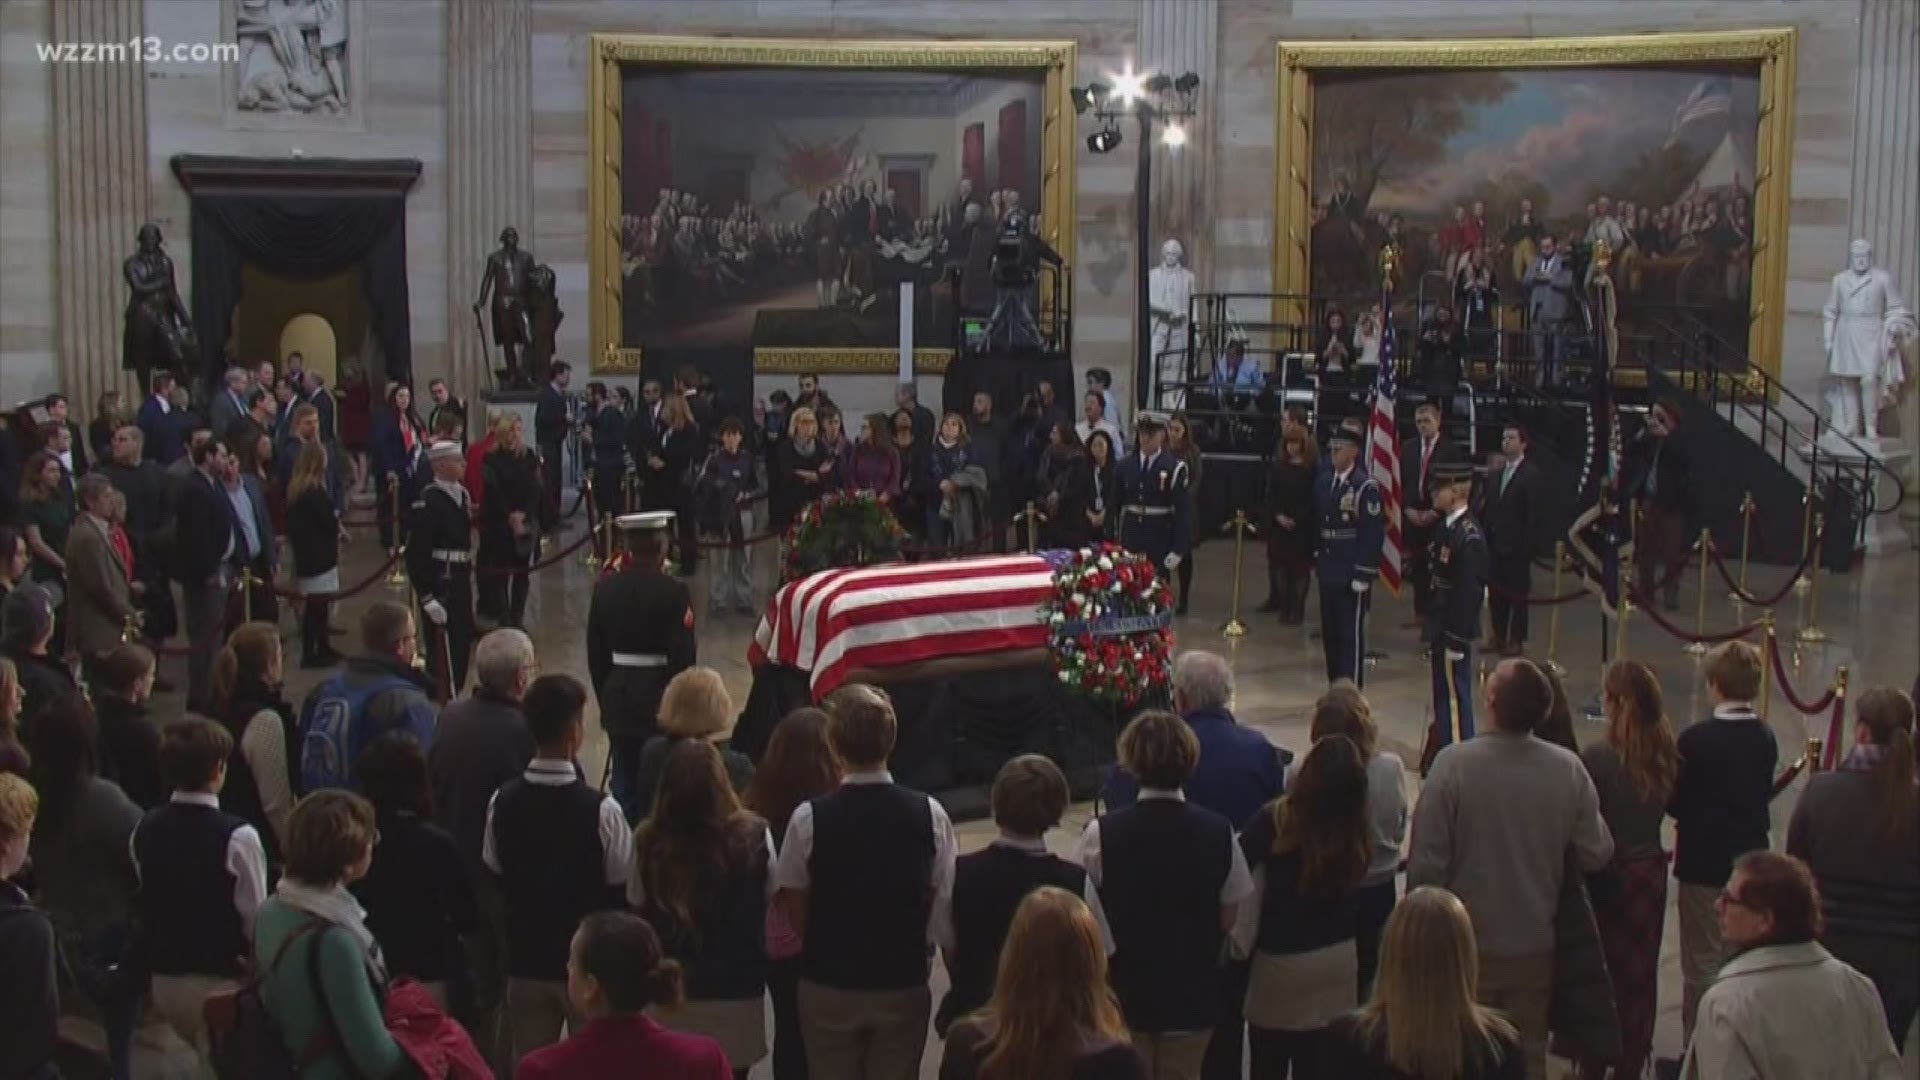 Funeral planner for Ford reminisces during Bush's ceremonies